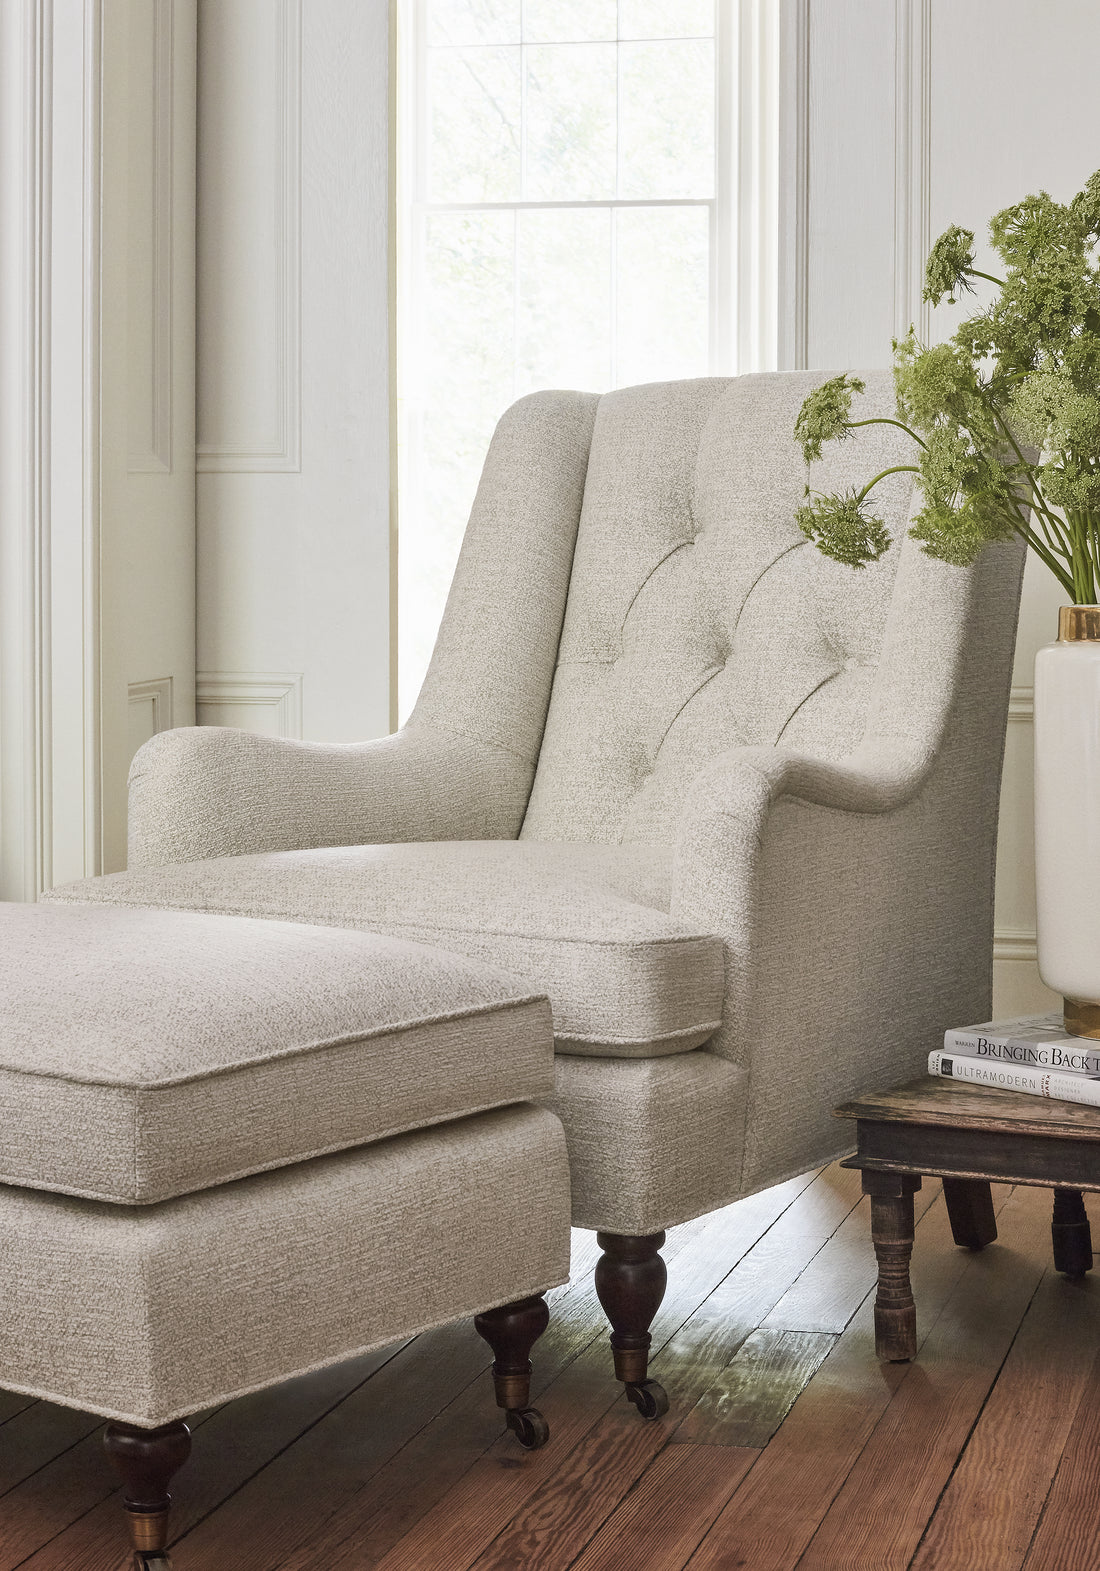 Newport Wing Chair and Brookline Ottoman in Shiloh woven fabric in heather linen color - pattern number W789113 - by Thibaut in the Reverie collection